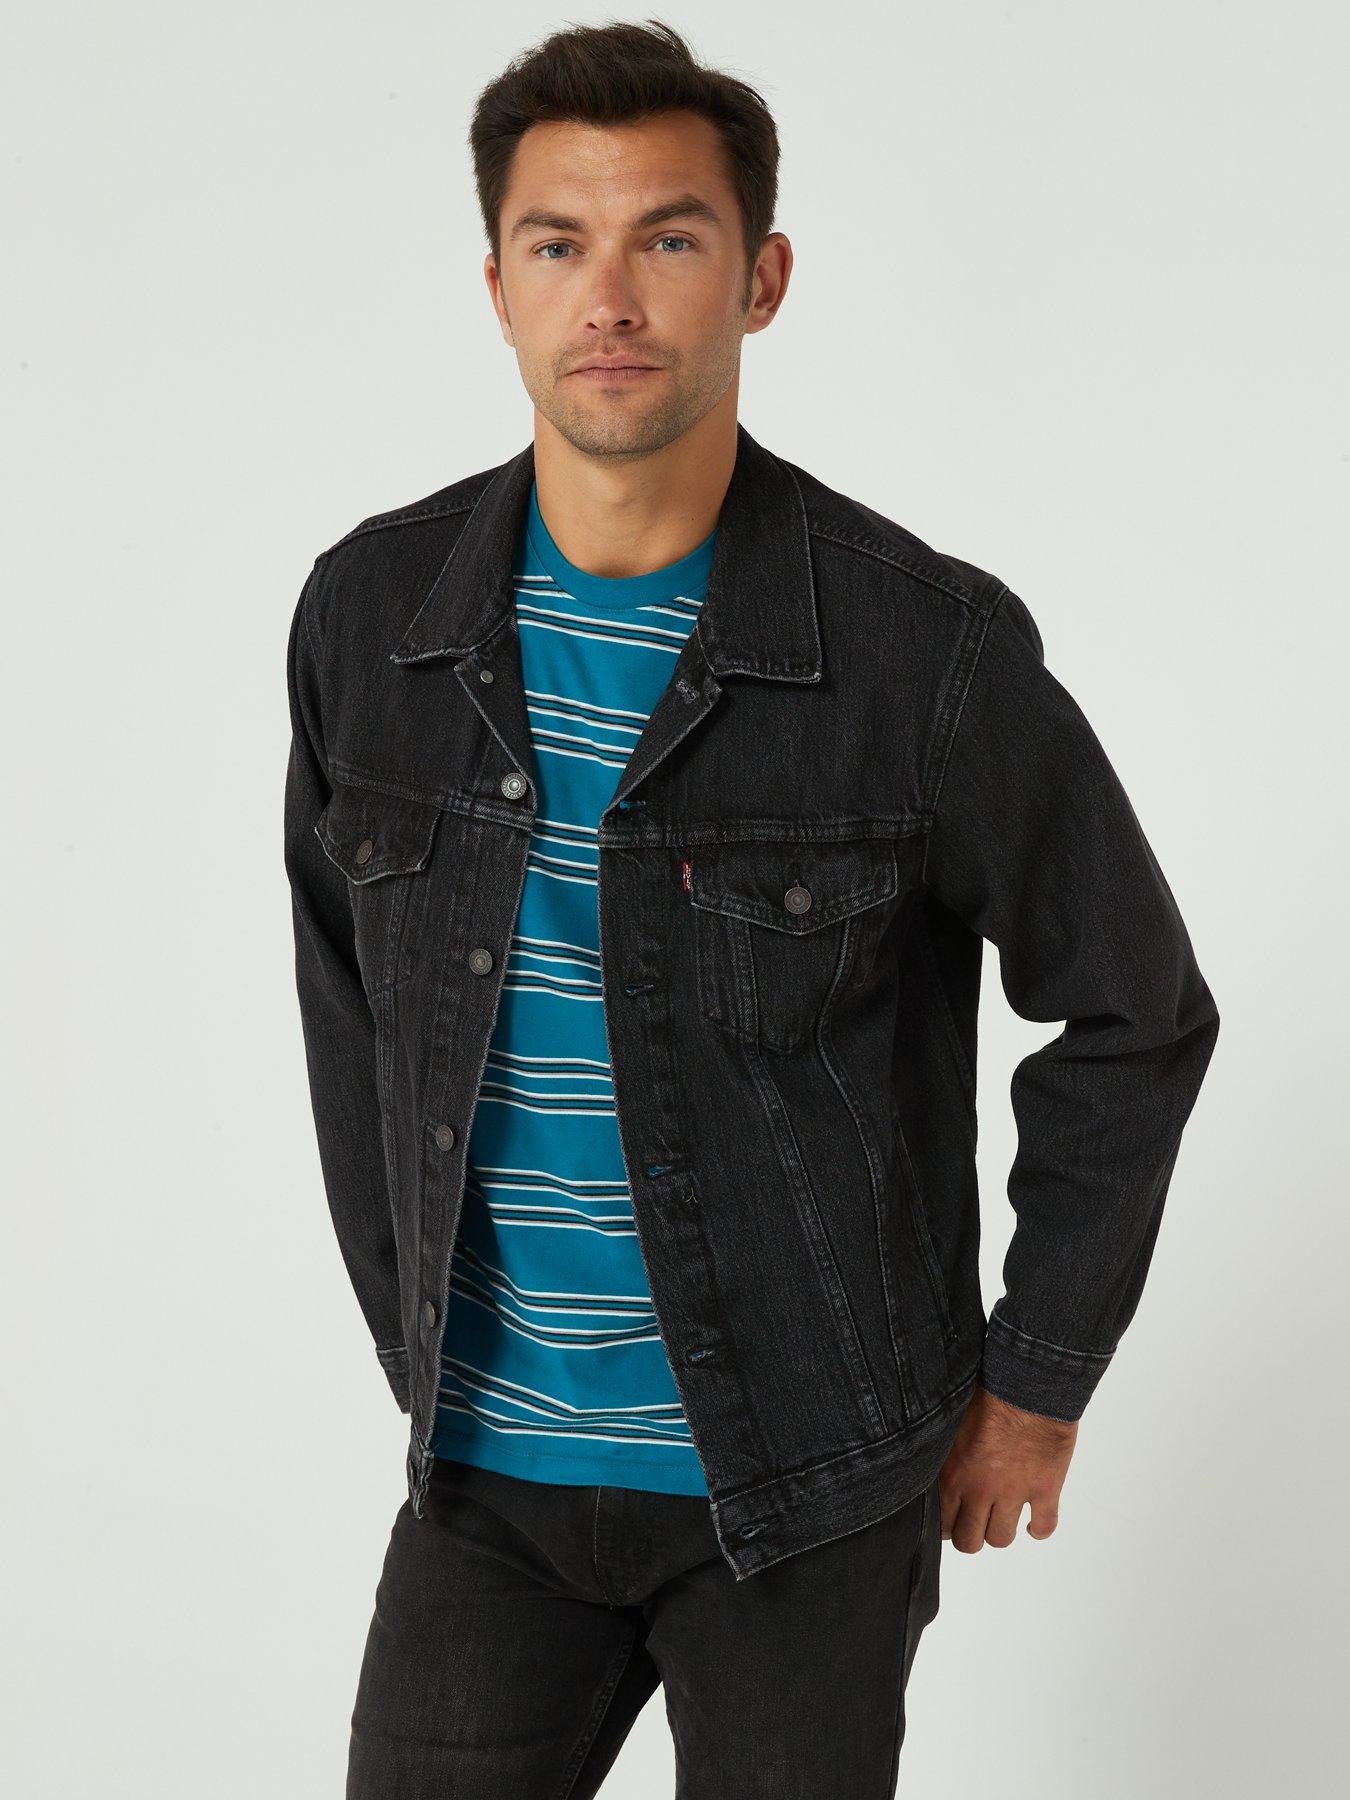 Google and Levis' second jacket is smarter, but still a novelty